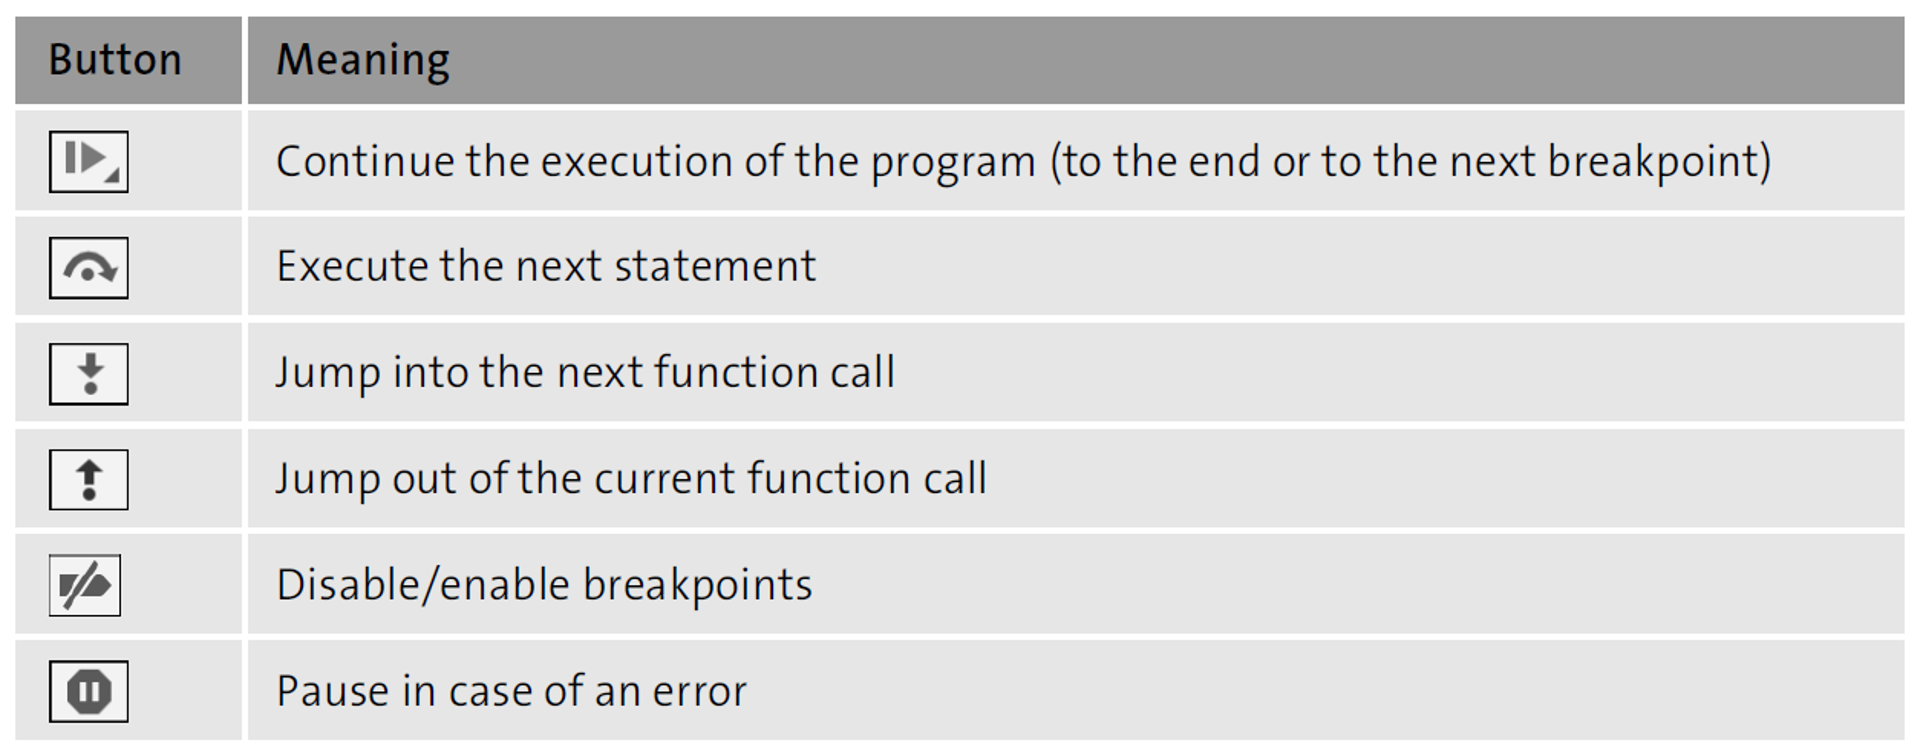 Meanings of the Different Buttons to Control the Debugger